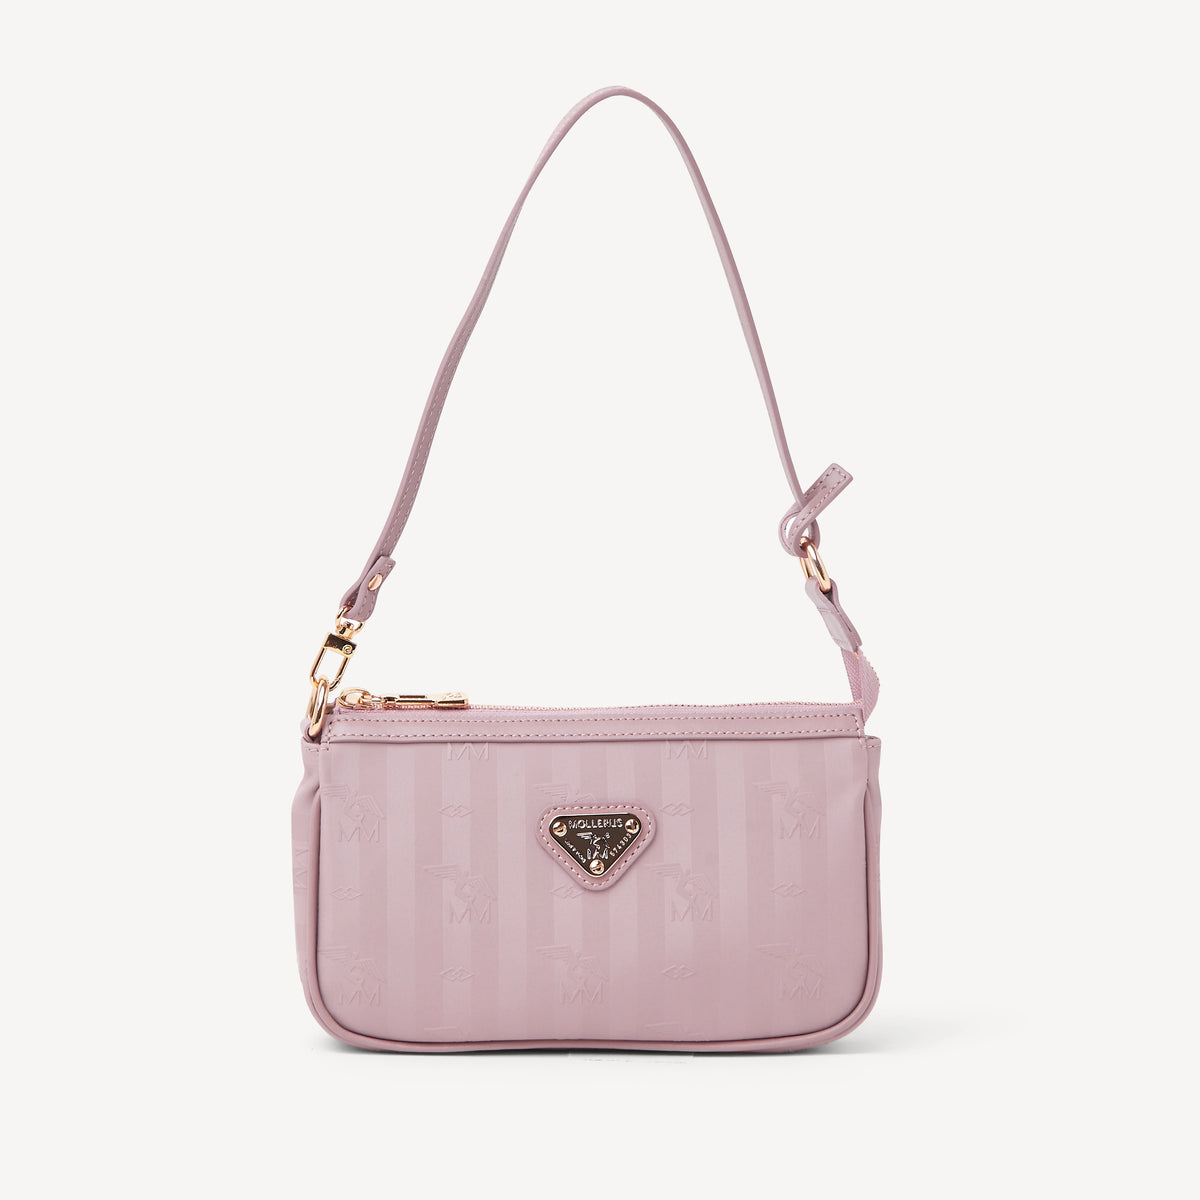 MISSY | Schultertasche rosé/gold - frontal